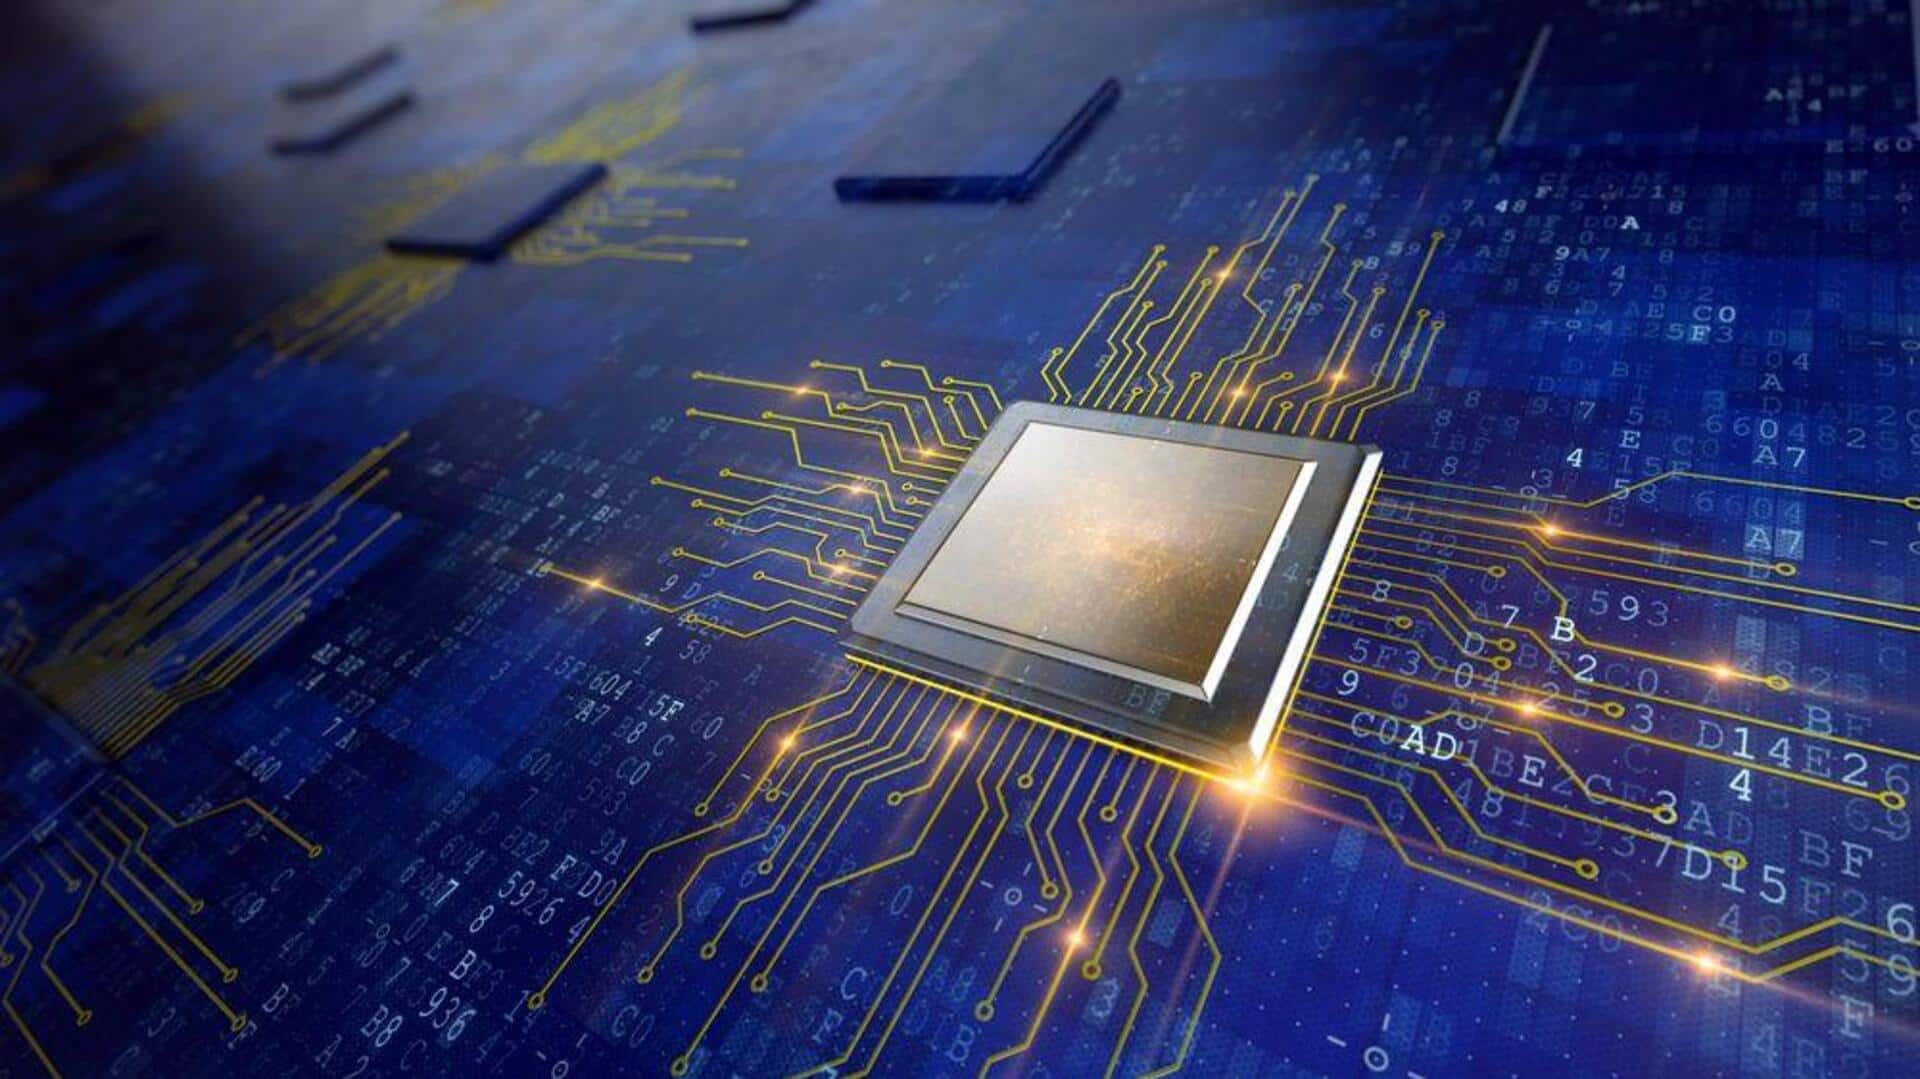 Indian startup launches first indigenously designed microcontroller chip